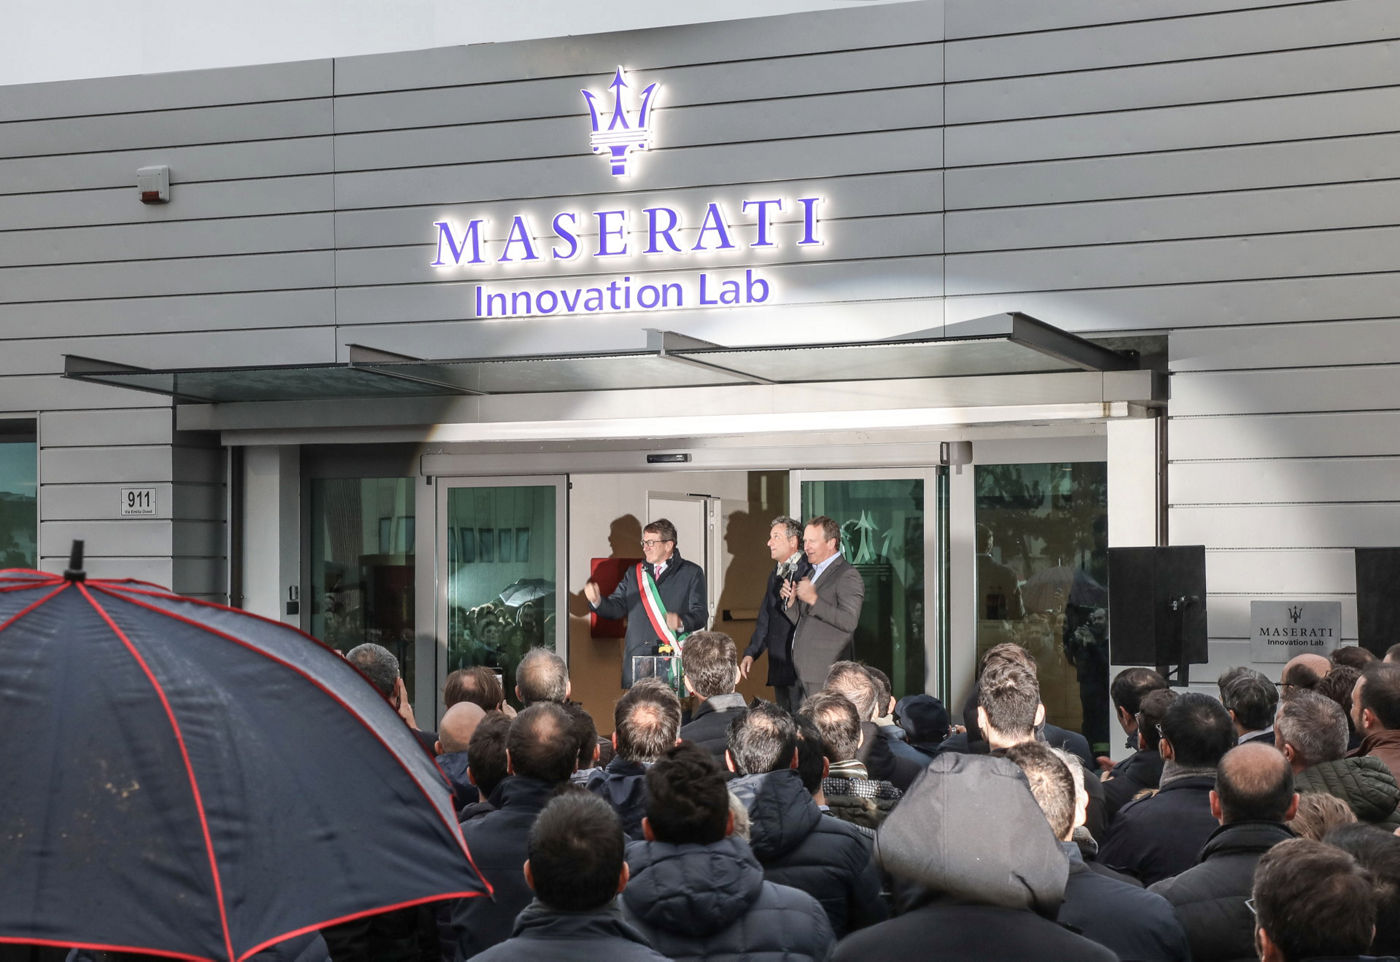 Maserati Innovation Lab with many people outside 